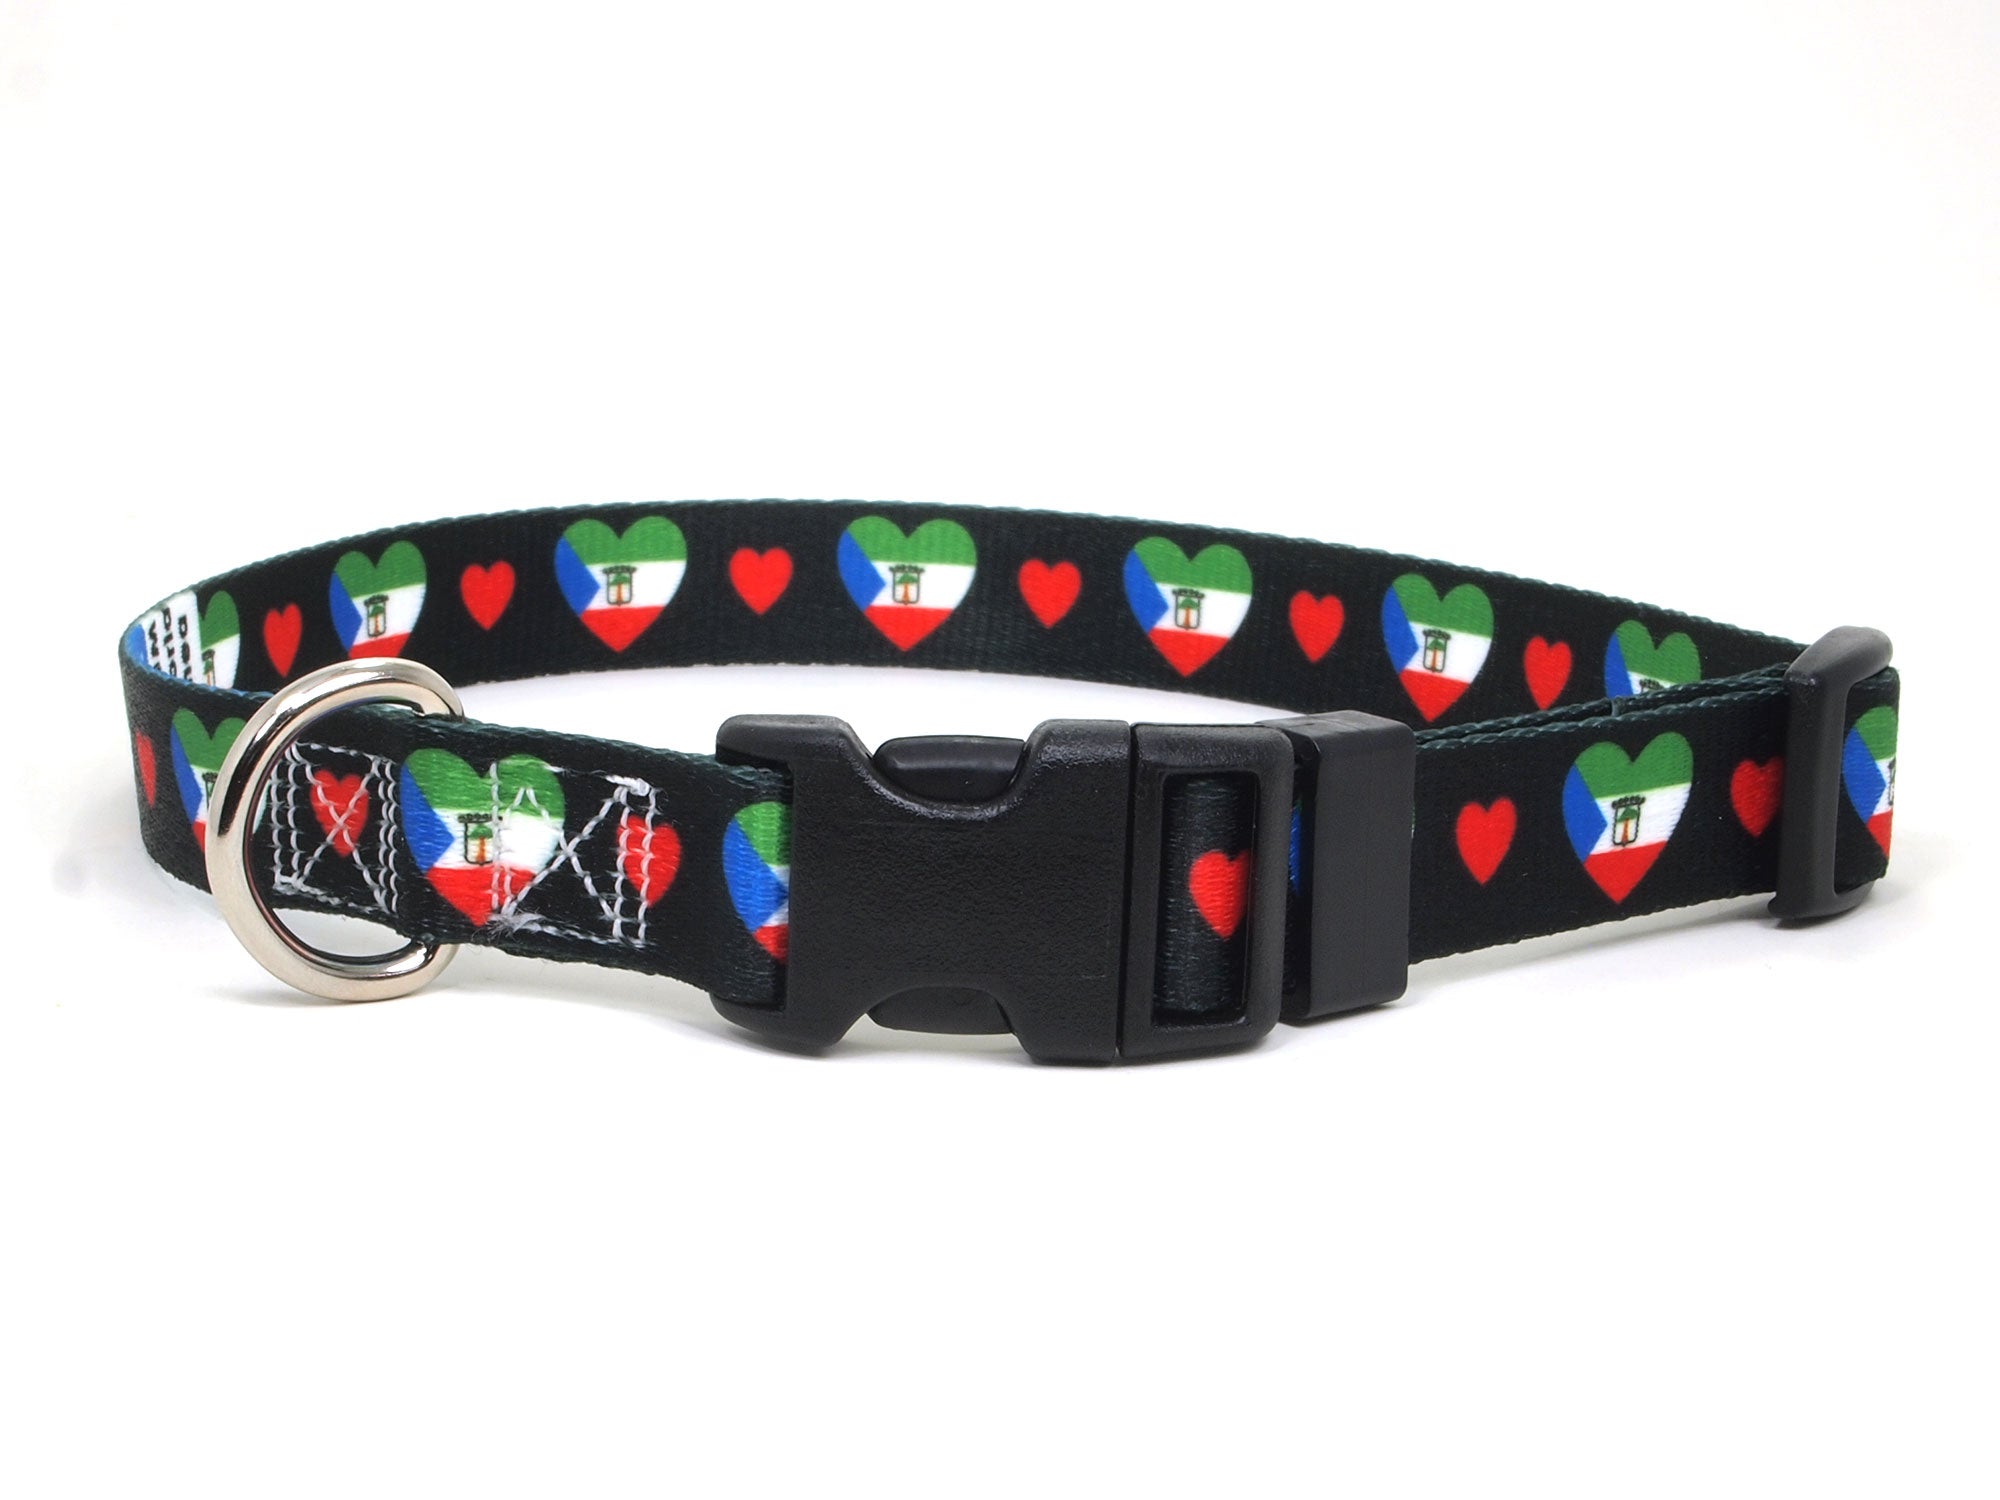 Dog Collar with Equatorial Guinea Hearts Pattern in black